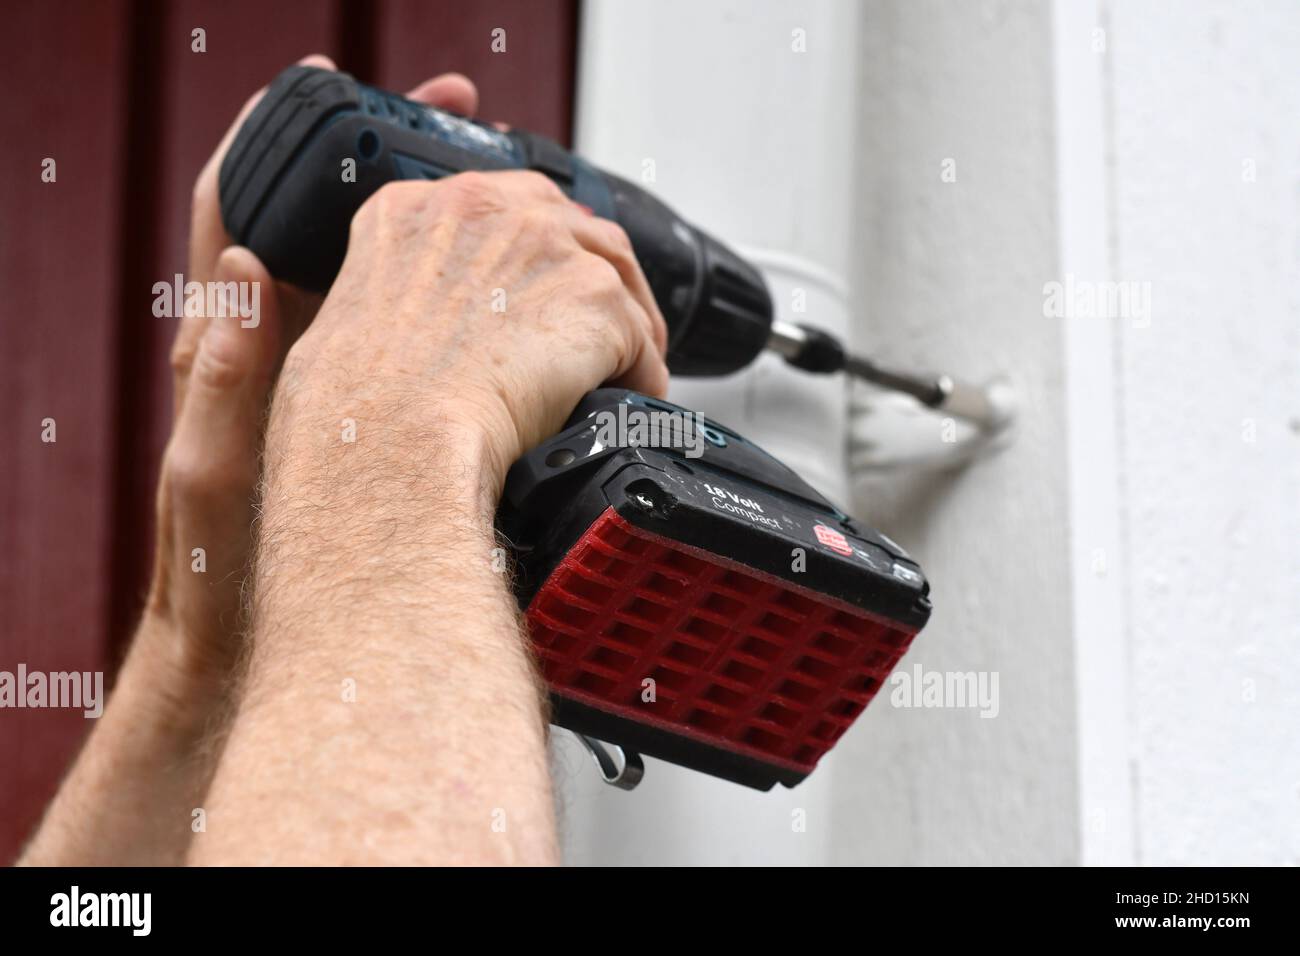 A man using a screwdriver machine to improve the house Stock Photo